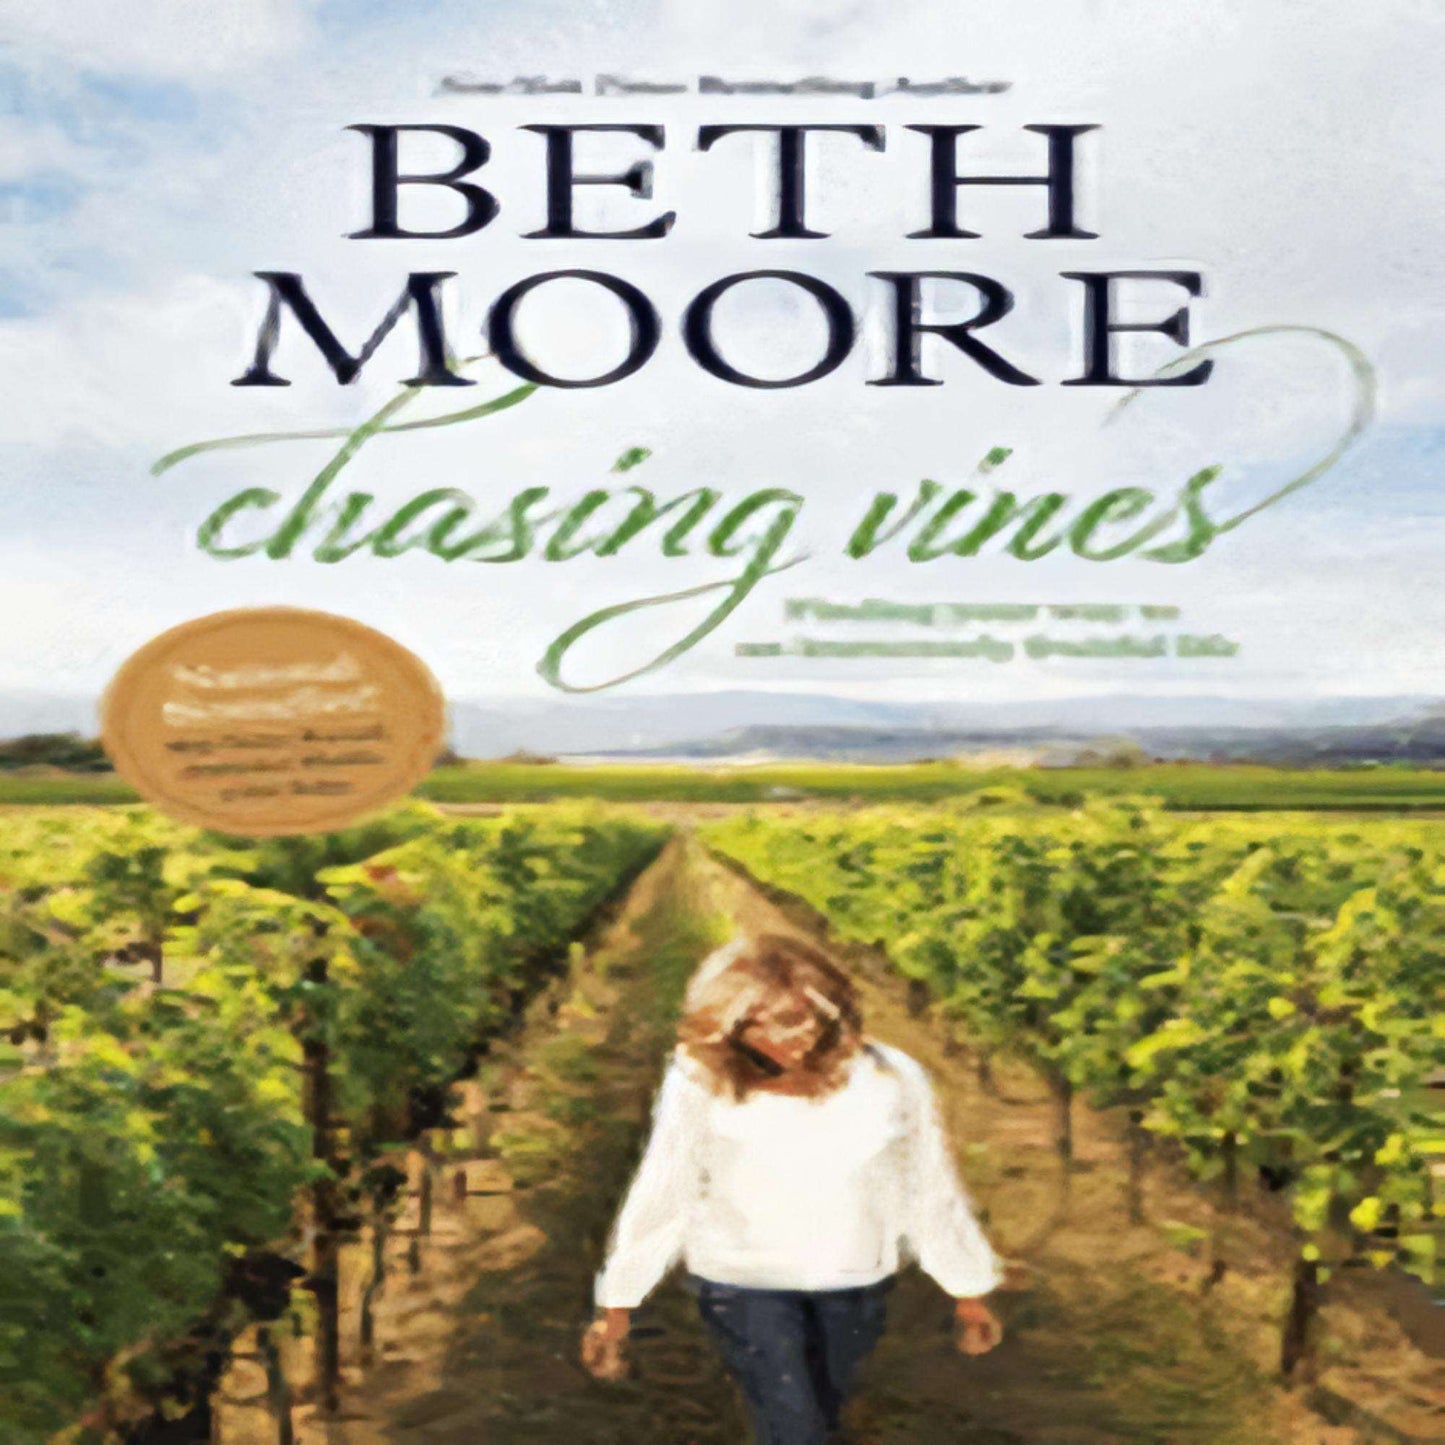 Chasing Vines: Finding Your Way to an Immensely Fruitful Life73-021423-149644082XDPGBOOKSTORE.COM. Today's Bestsellers.